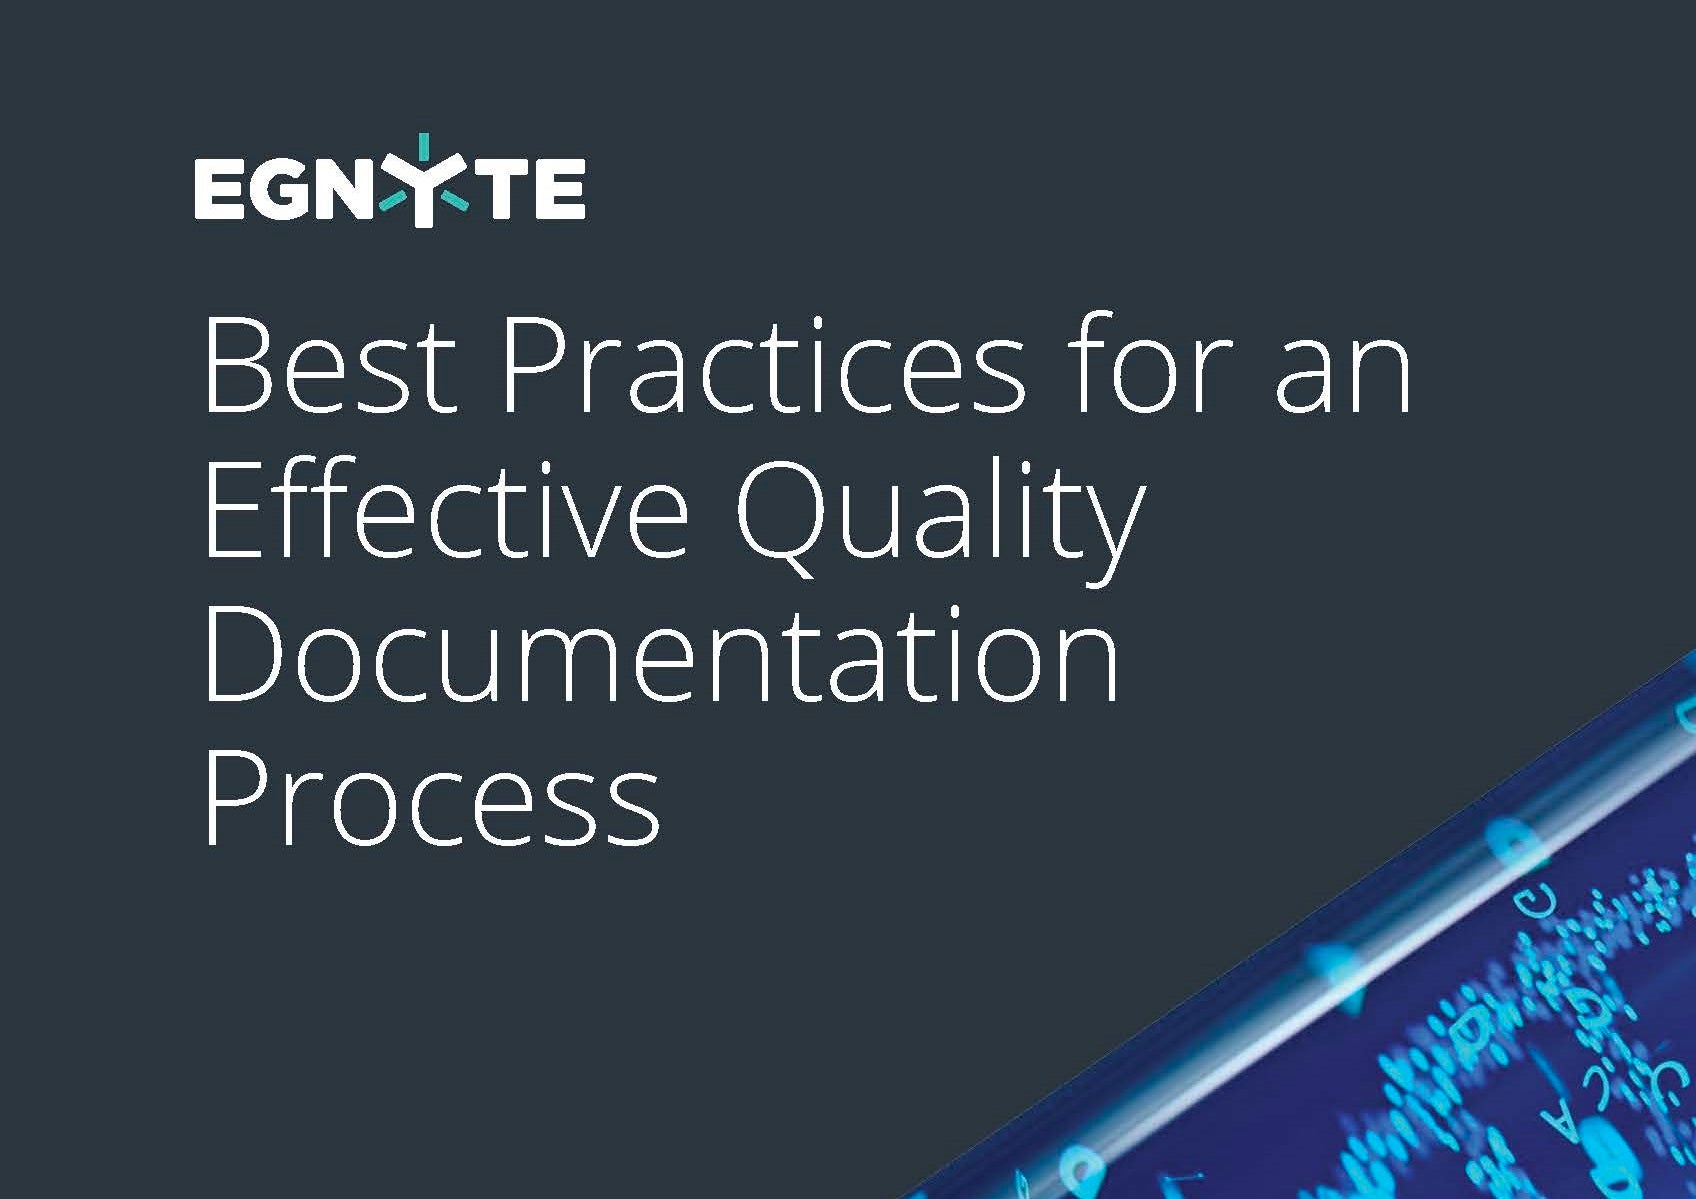 Best Practices for an Effective Quality Documentation Process